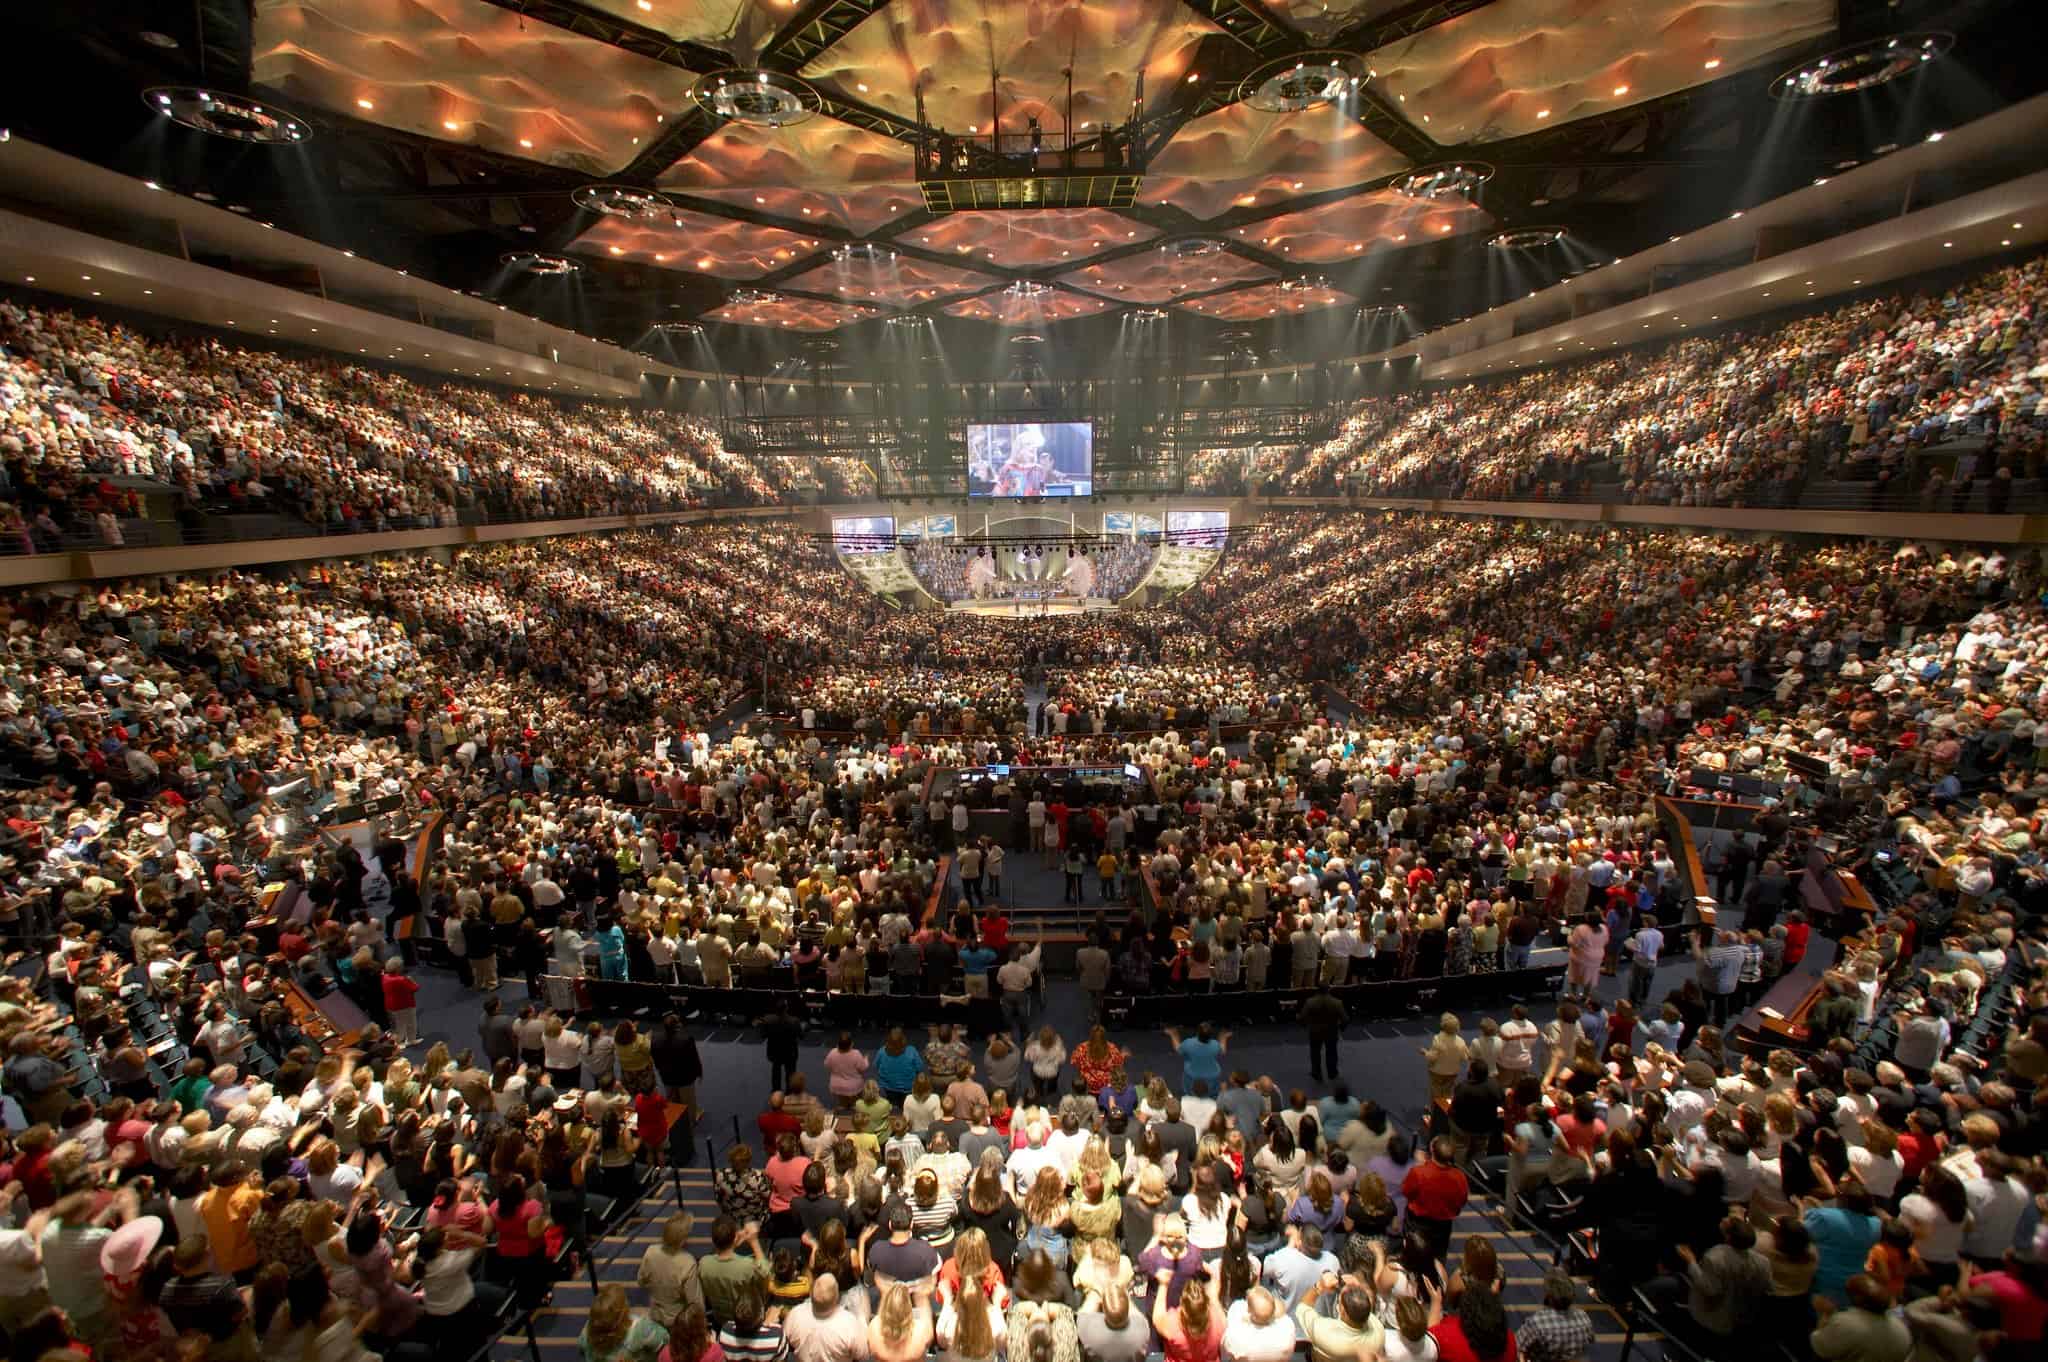 The stadium-like interior of a mega church is shown filled with people.